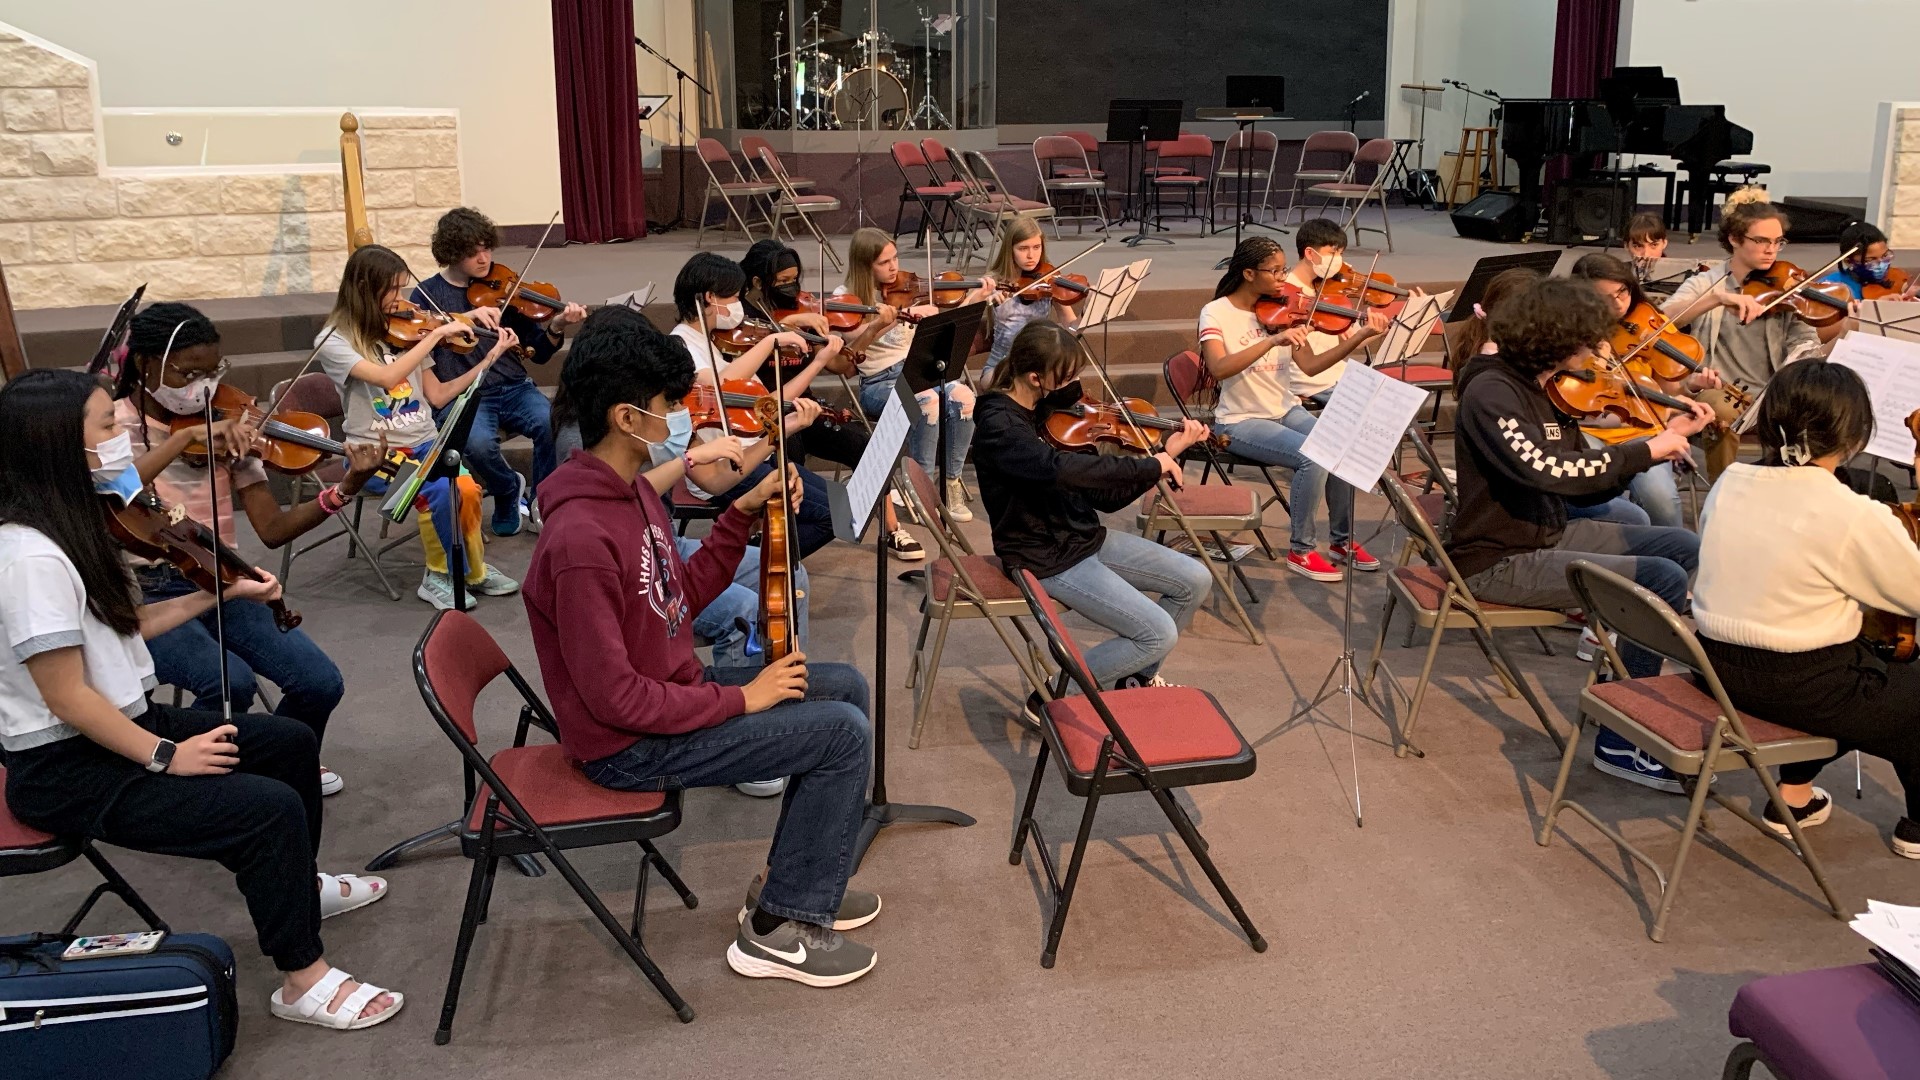 Texas Today anchor Jasmin Caldwell previews the Bell County Youth Orchestra before they take the stage this weekend.